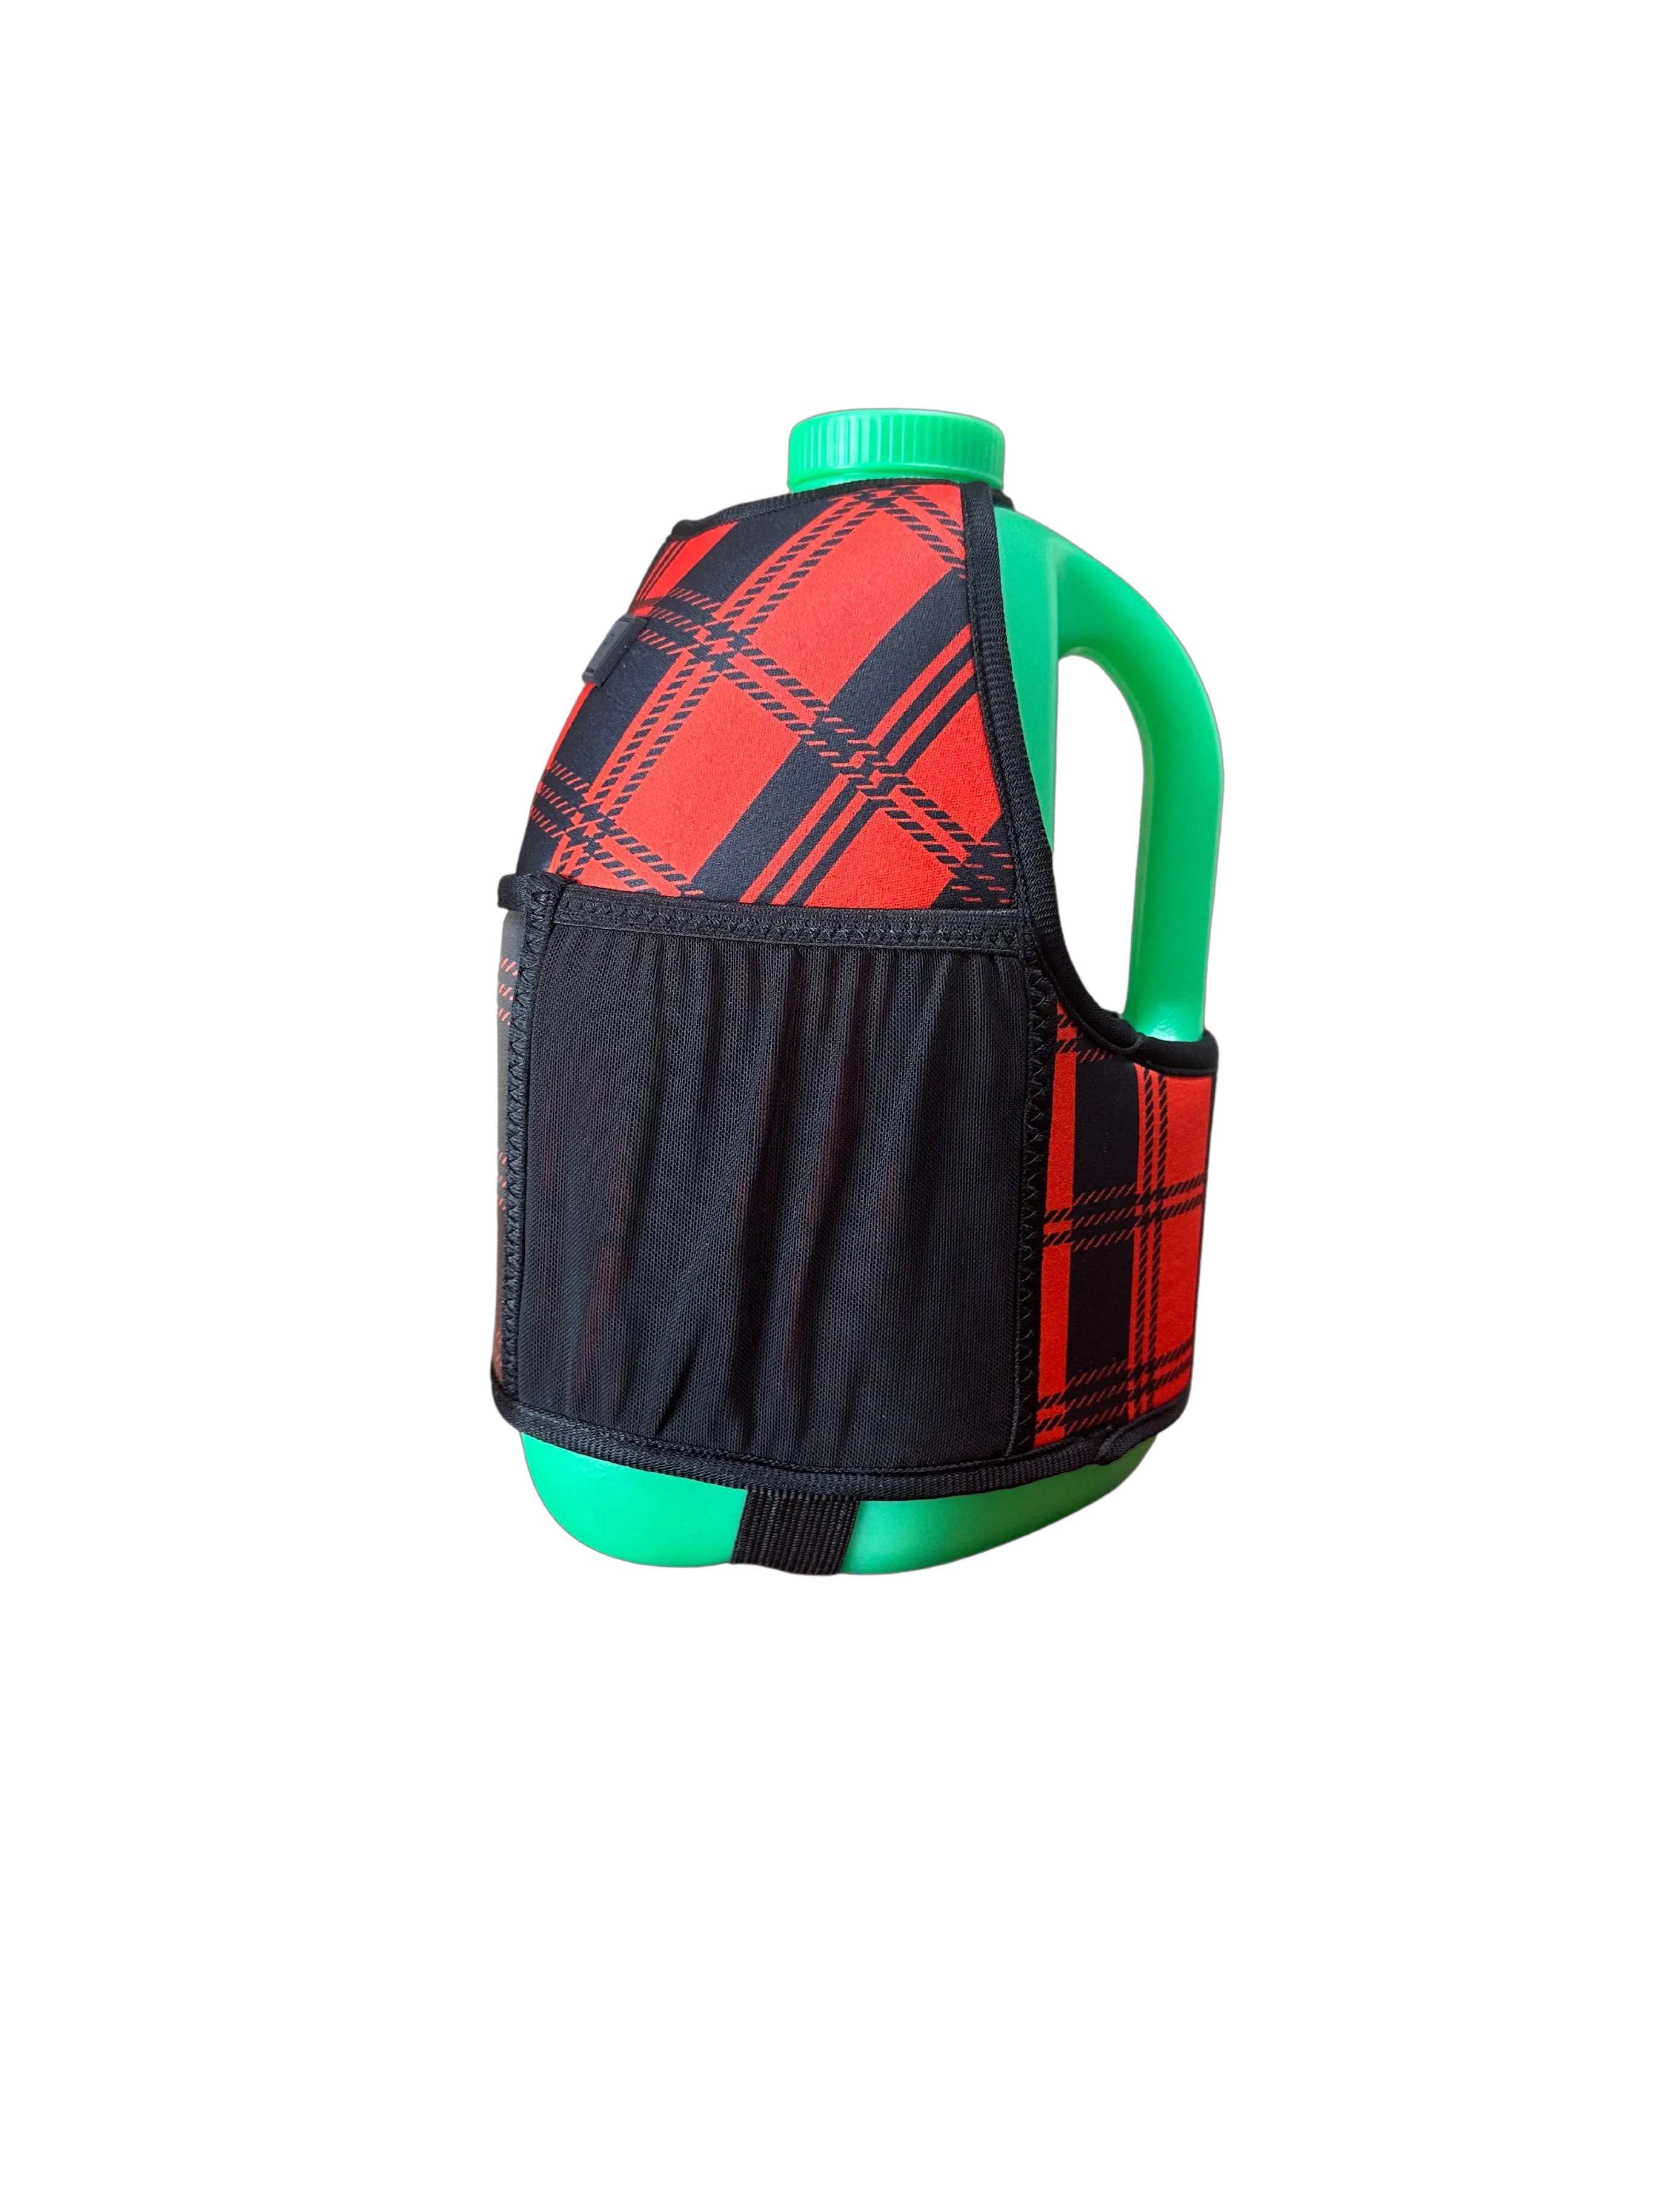 (1 GALLON COMBO) Green Jug / Red Plaid Booty